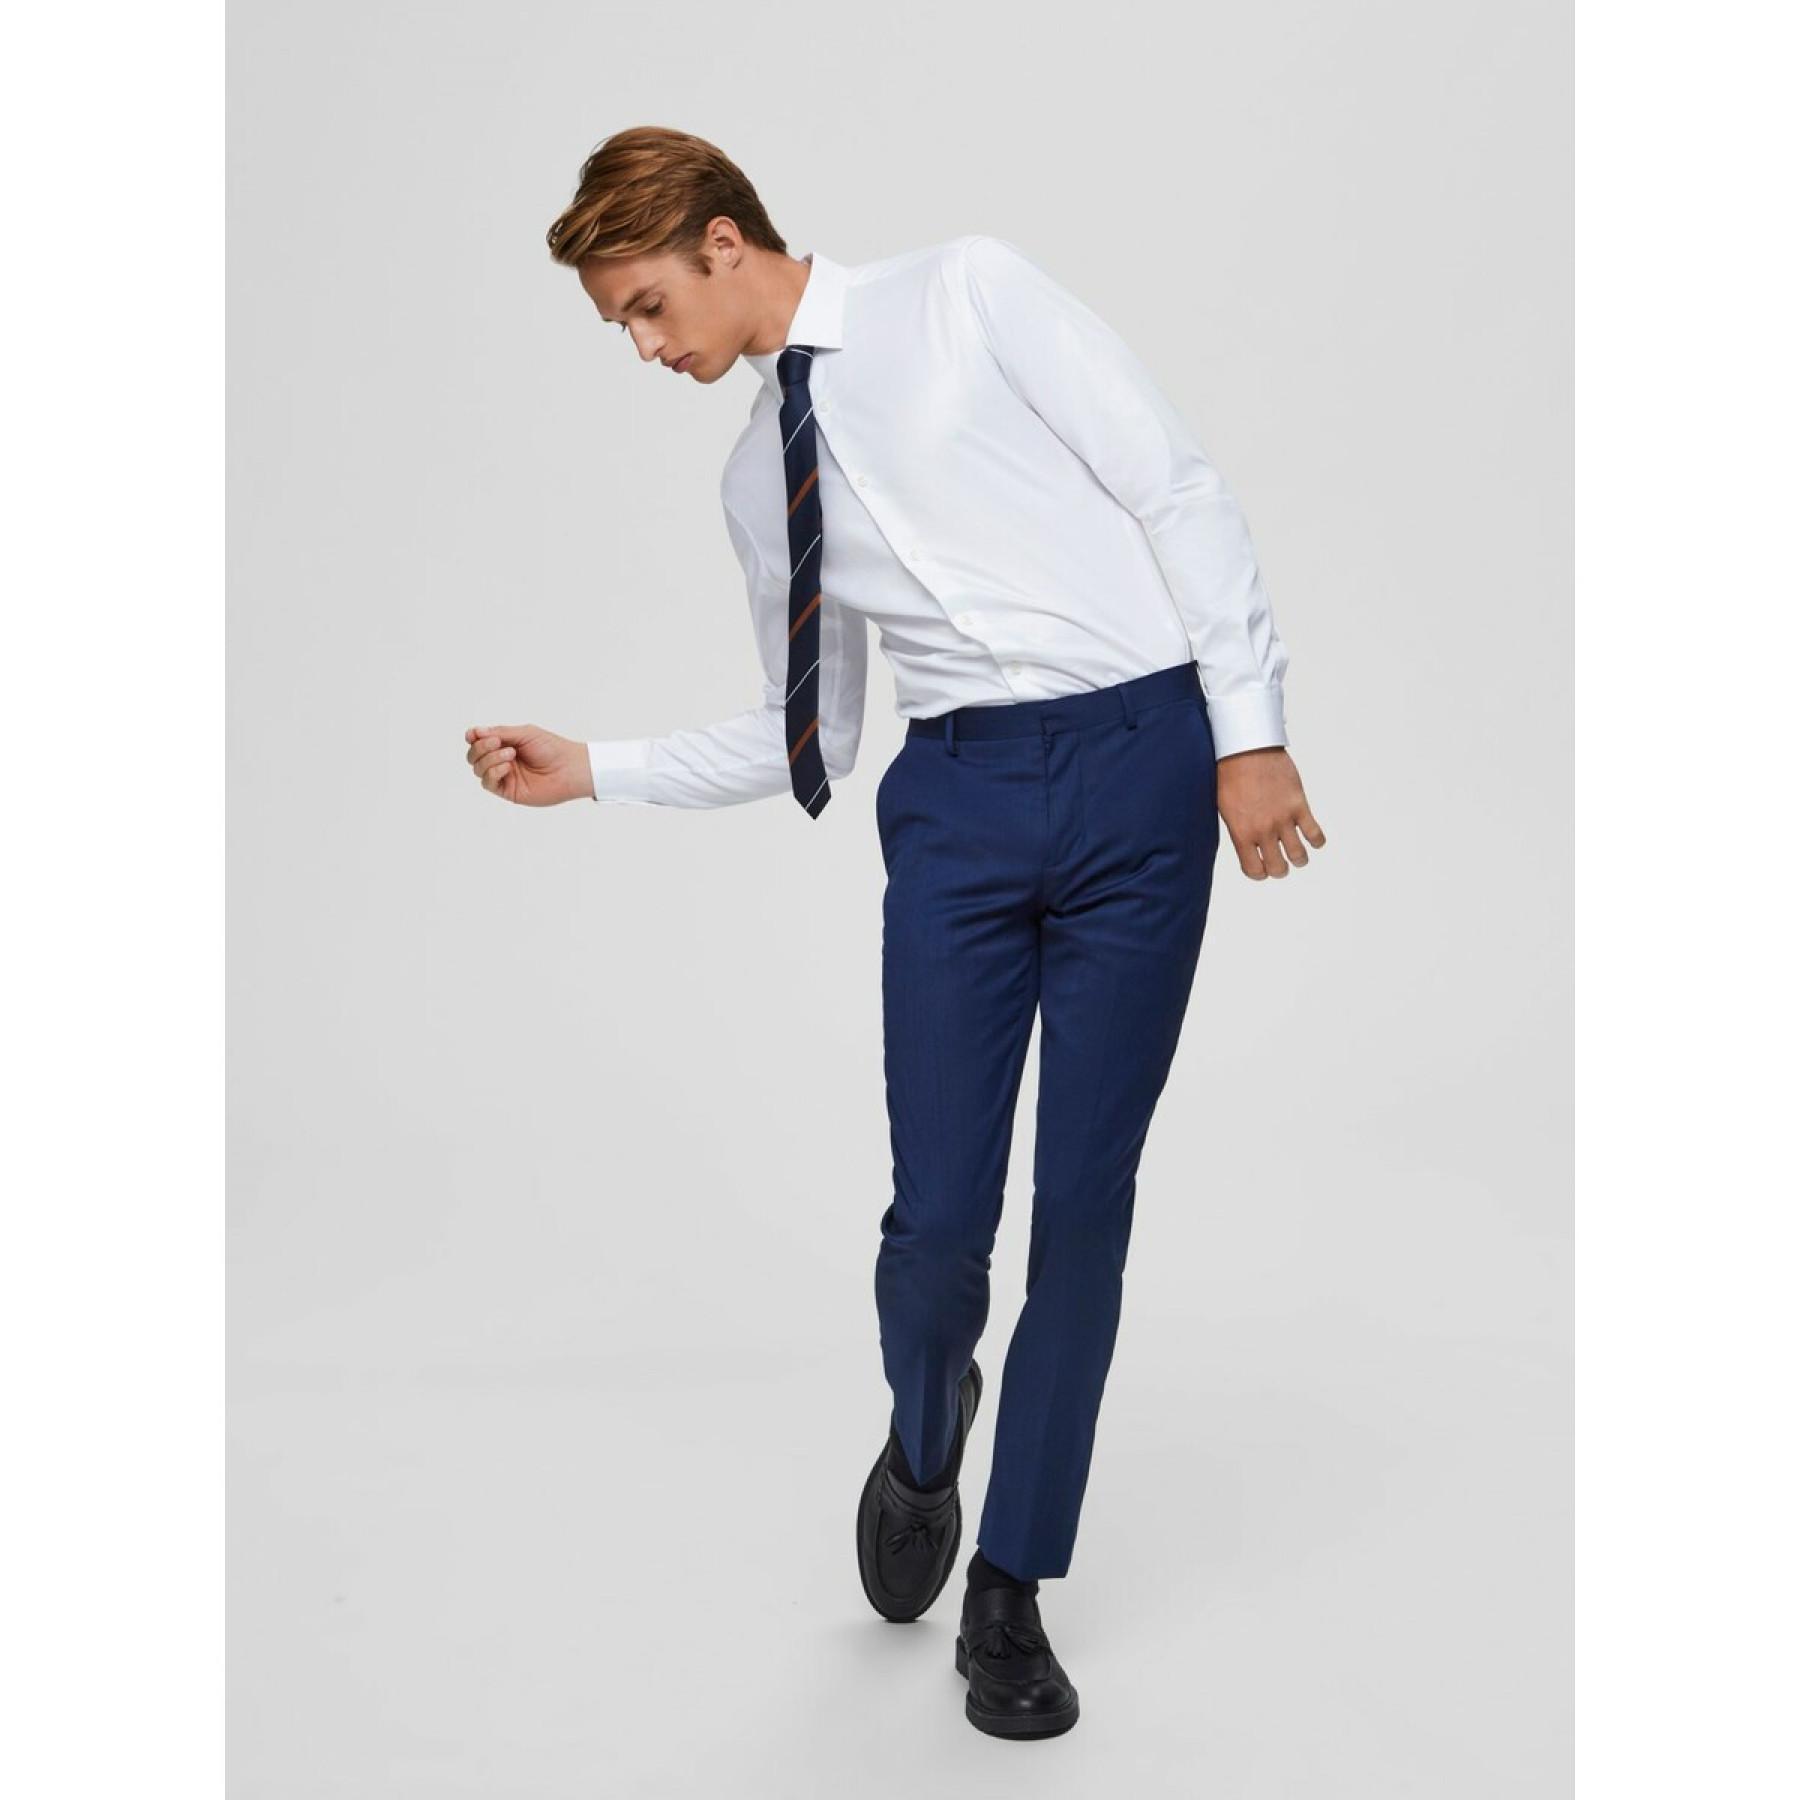 Overhemd Selected Sel-pelle manches longues slim